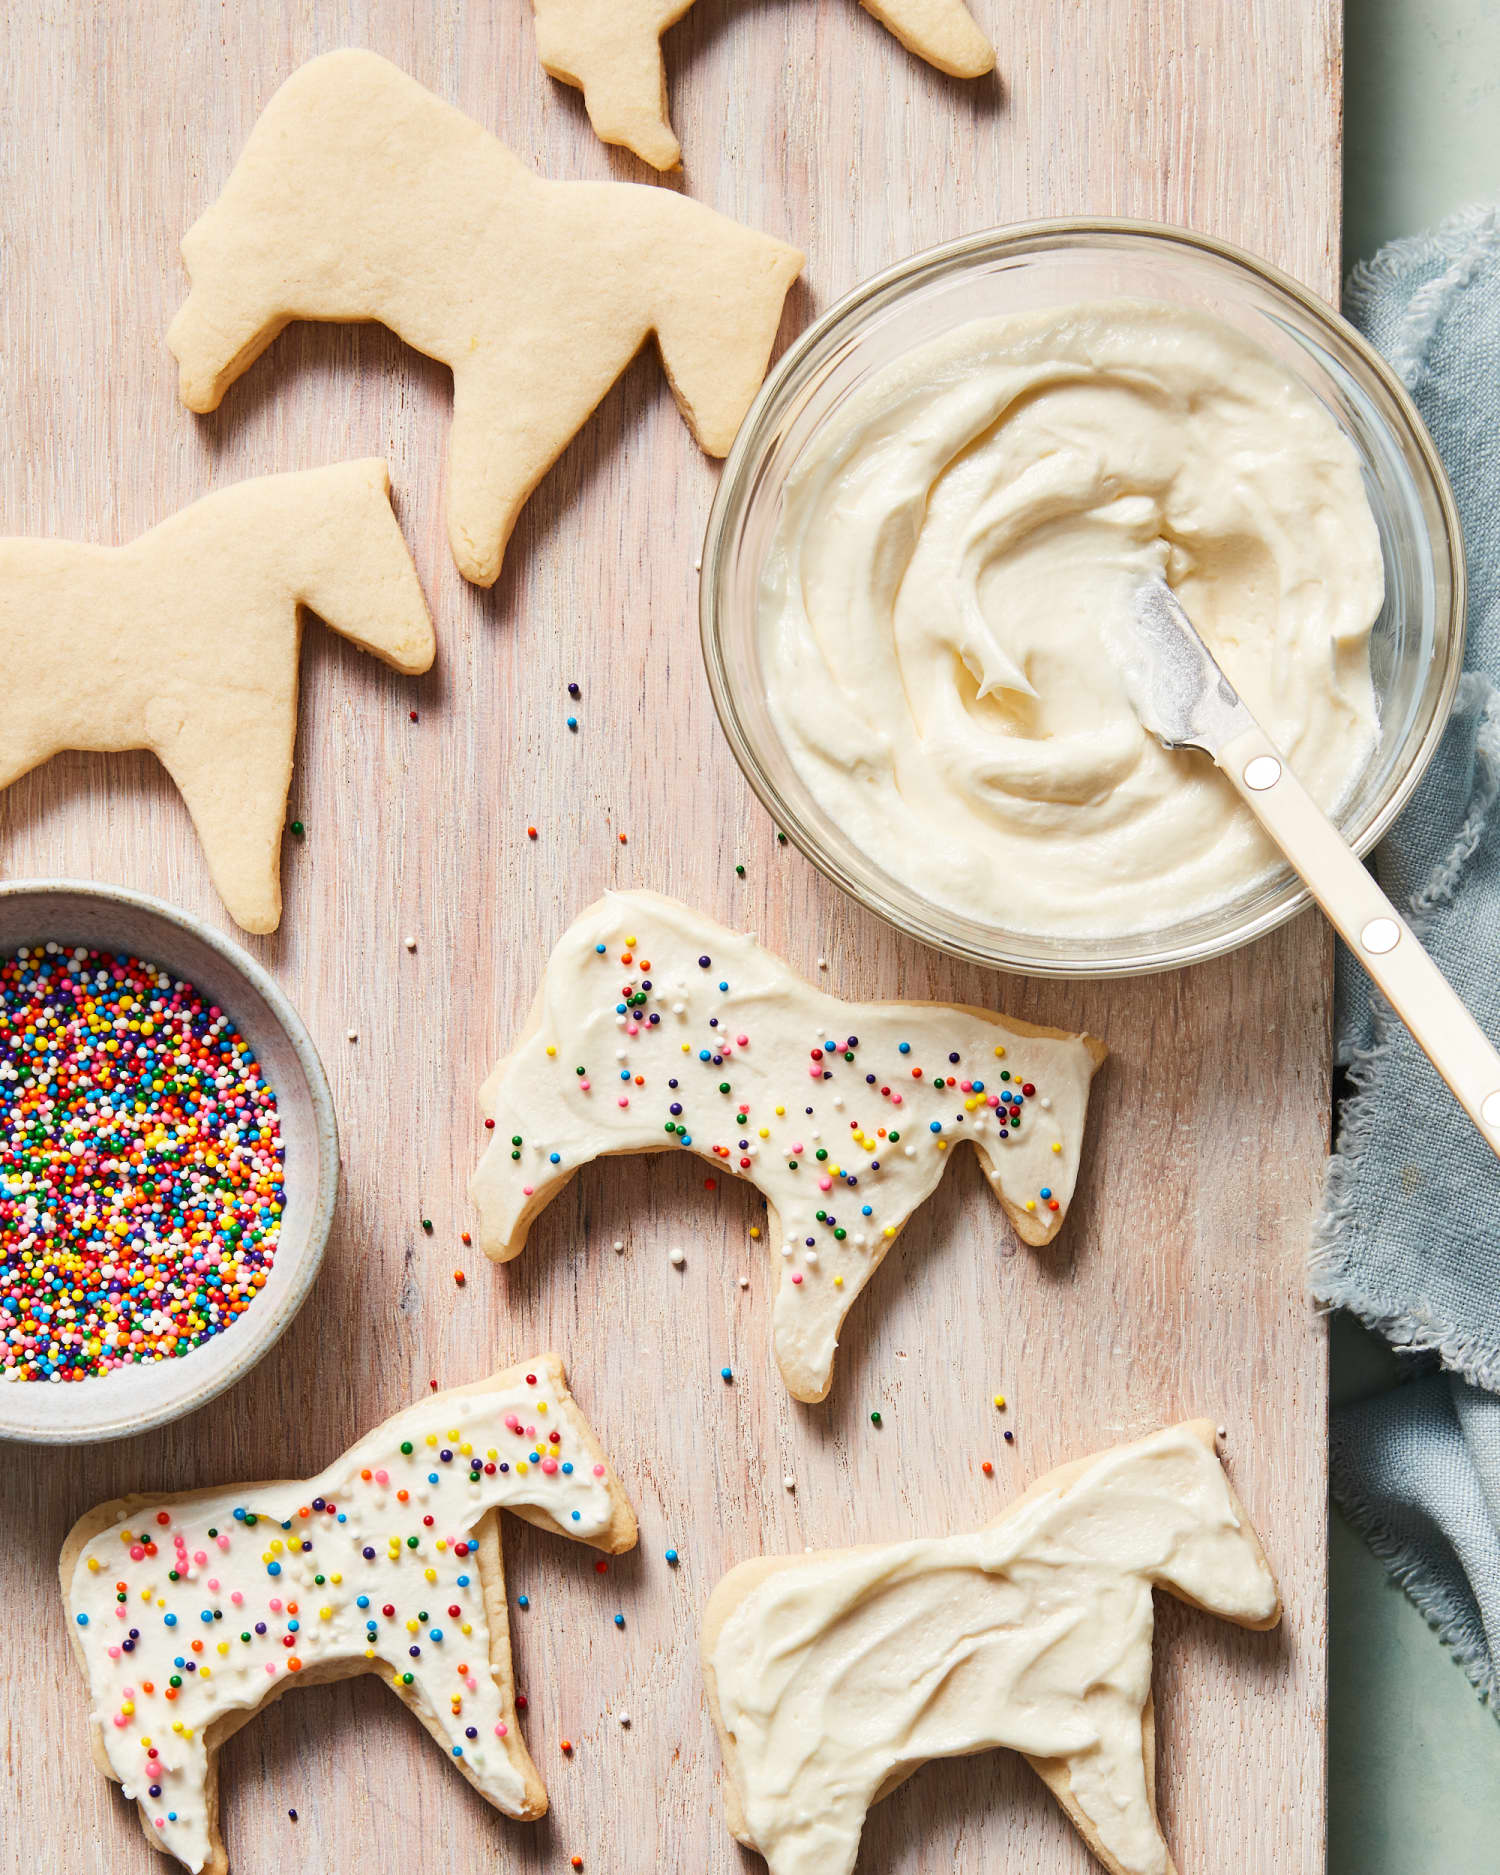 Meet Your New Go-To Sugar Cookie Recipe